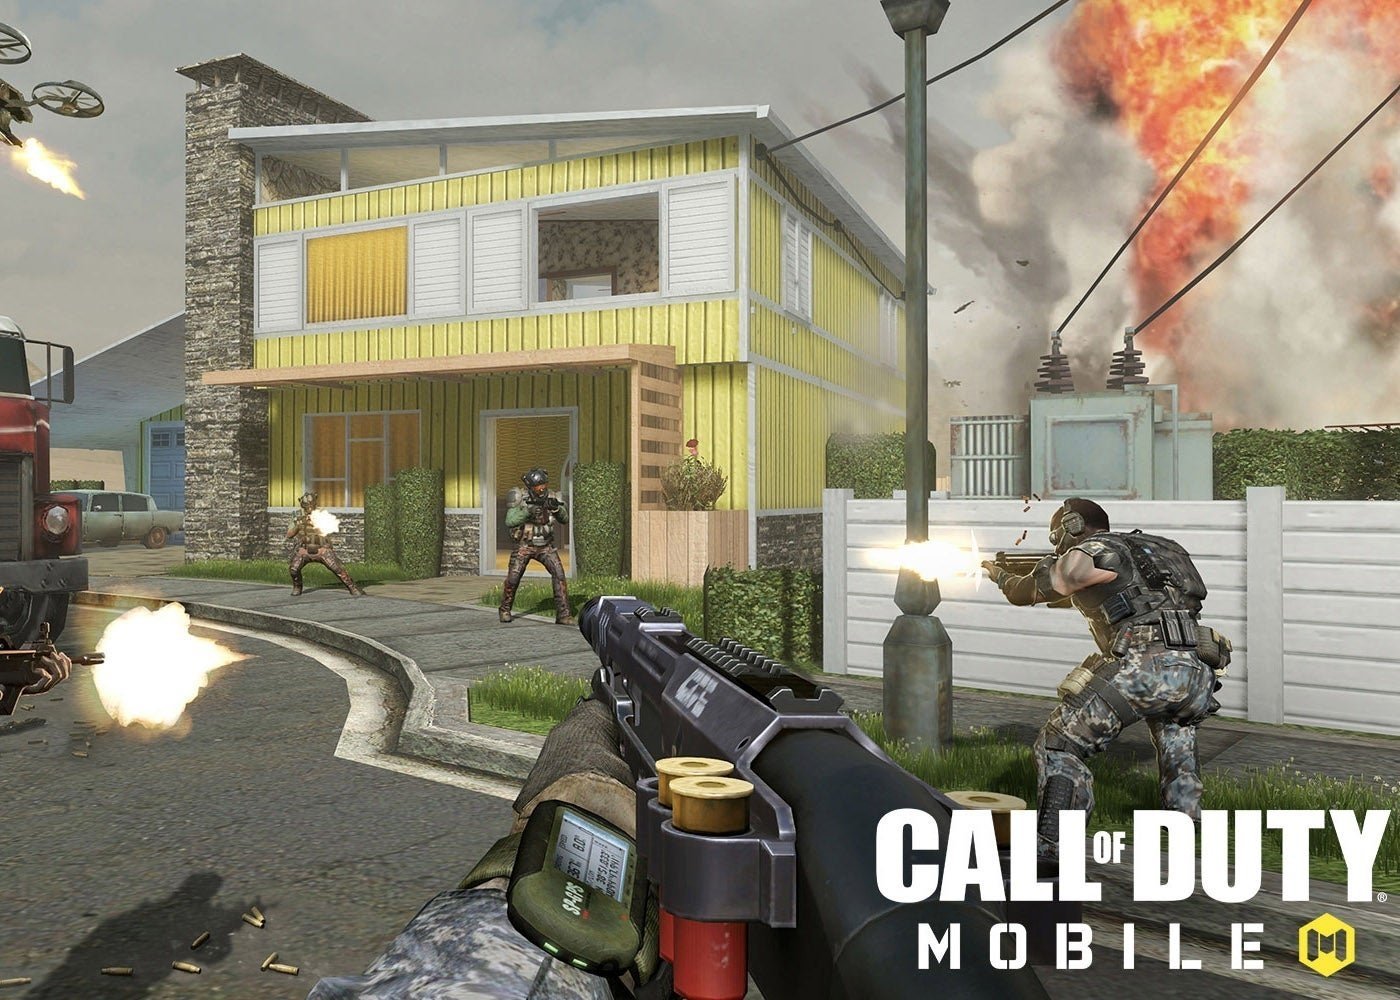 Call of Duty Mobile gameplay